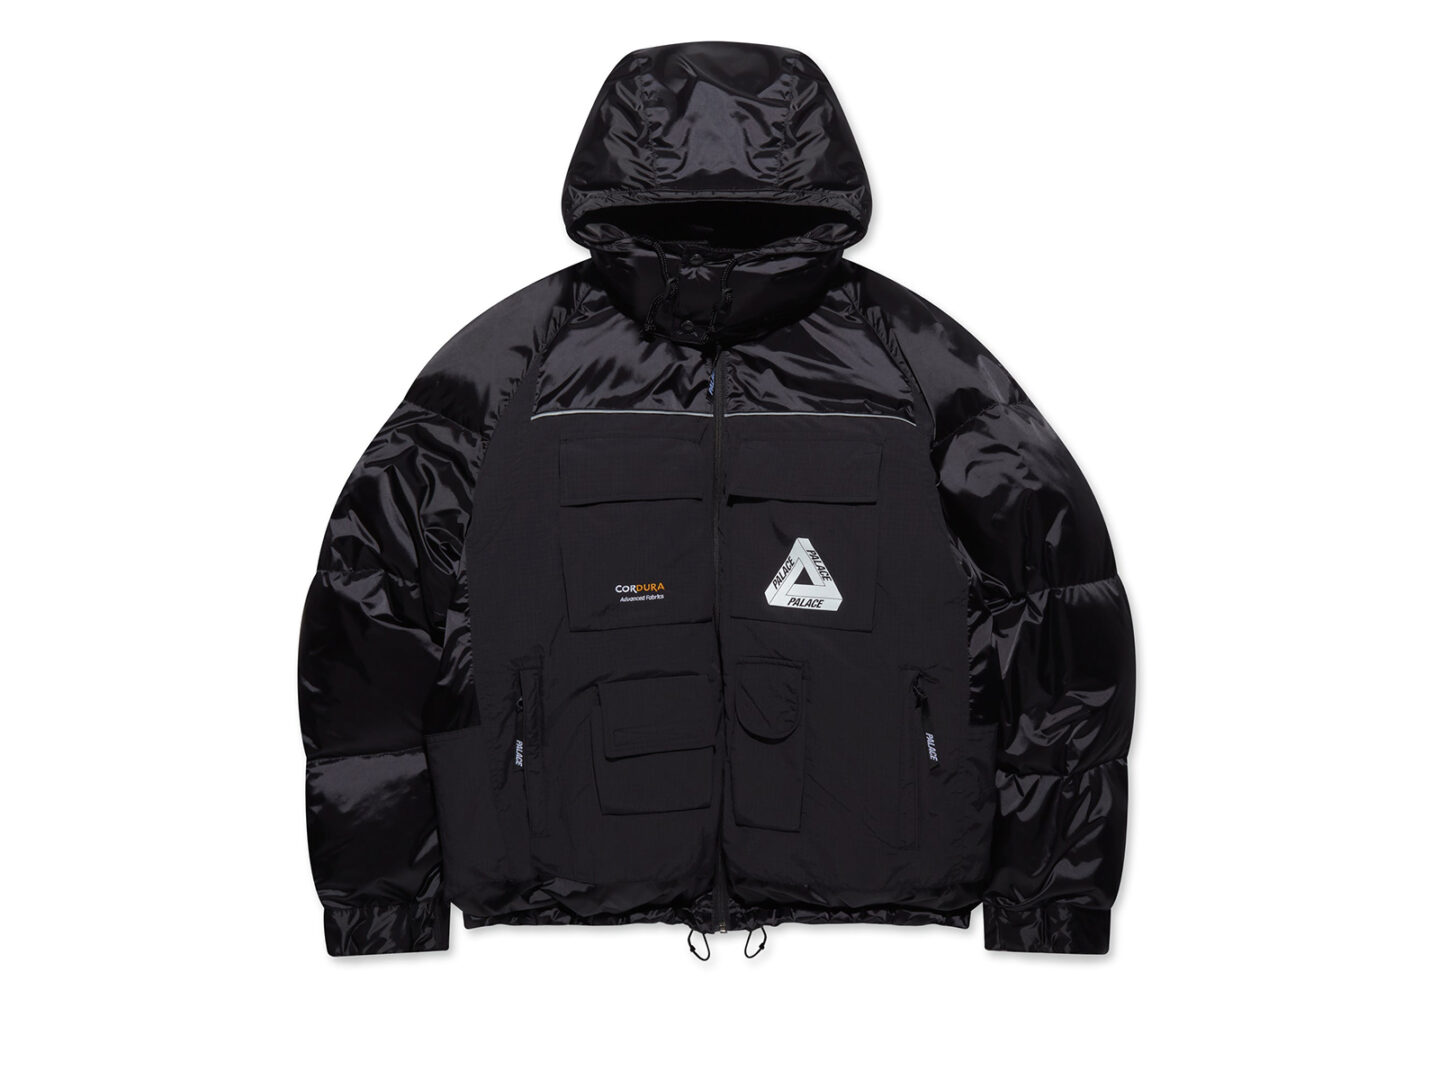 The Junya Watanabe x Palace jacket is now available for pre-order